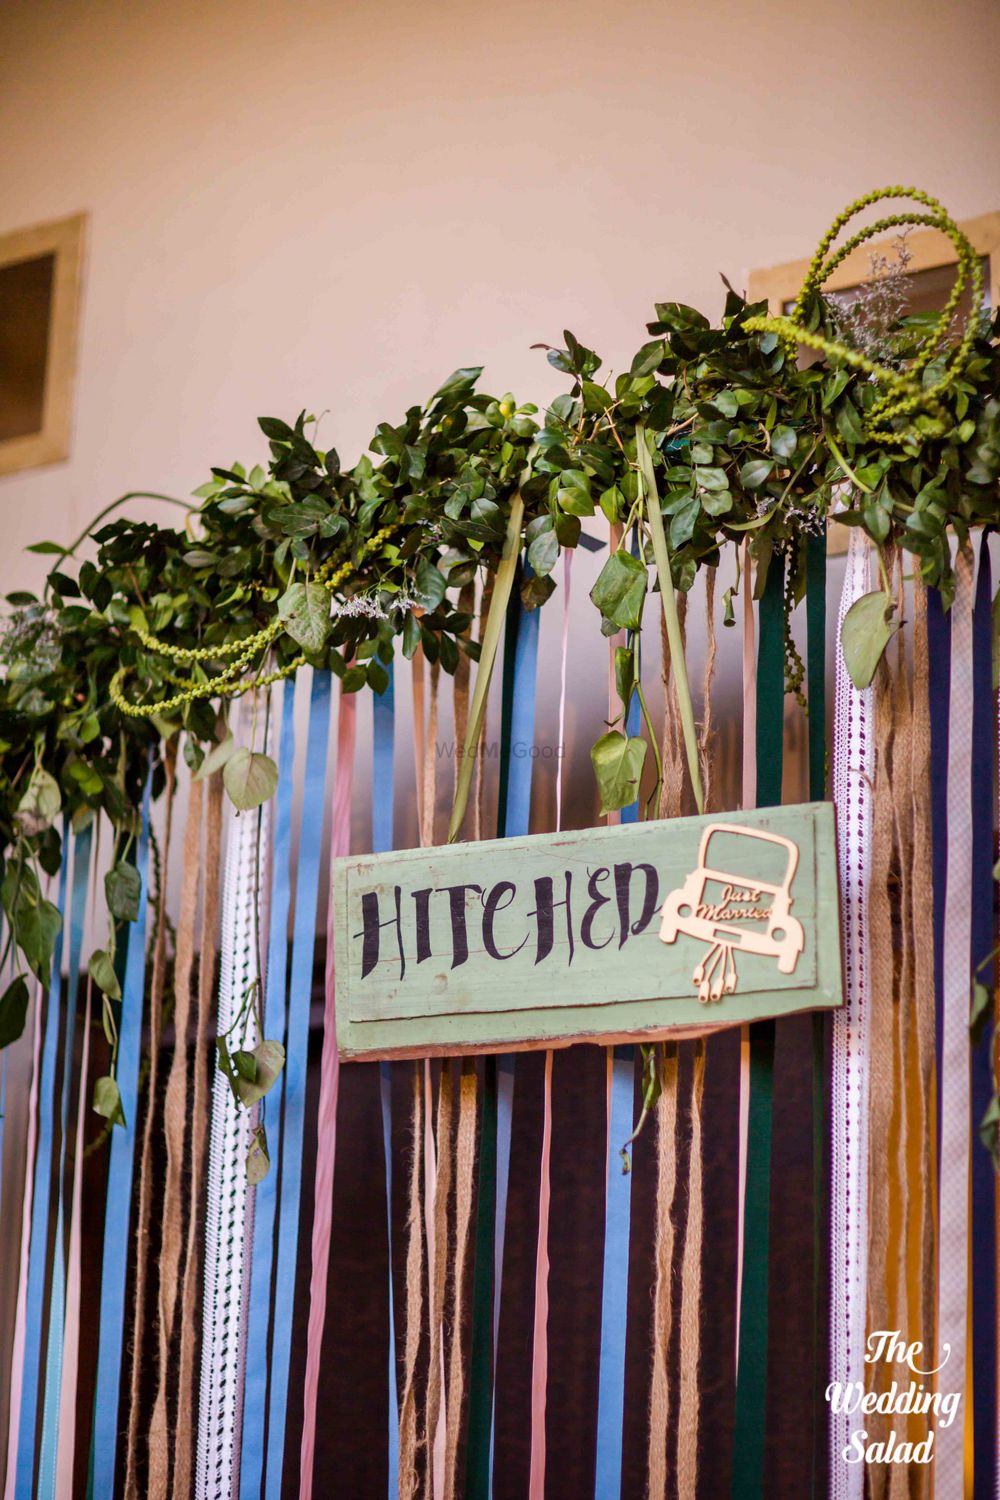 Photo of Hitched board in decor